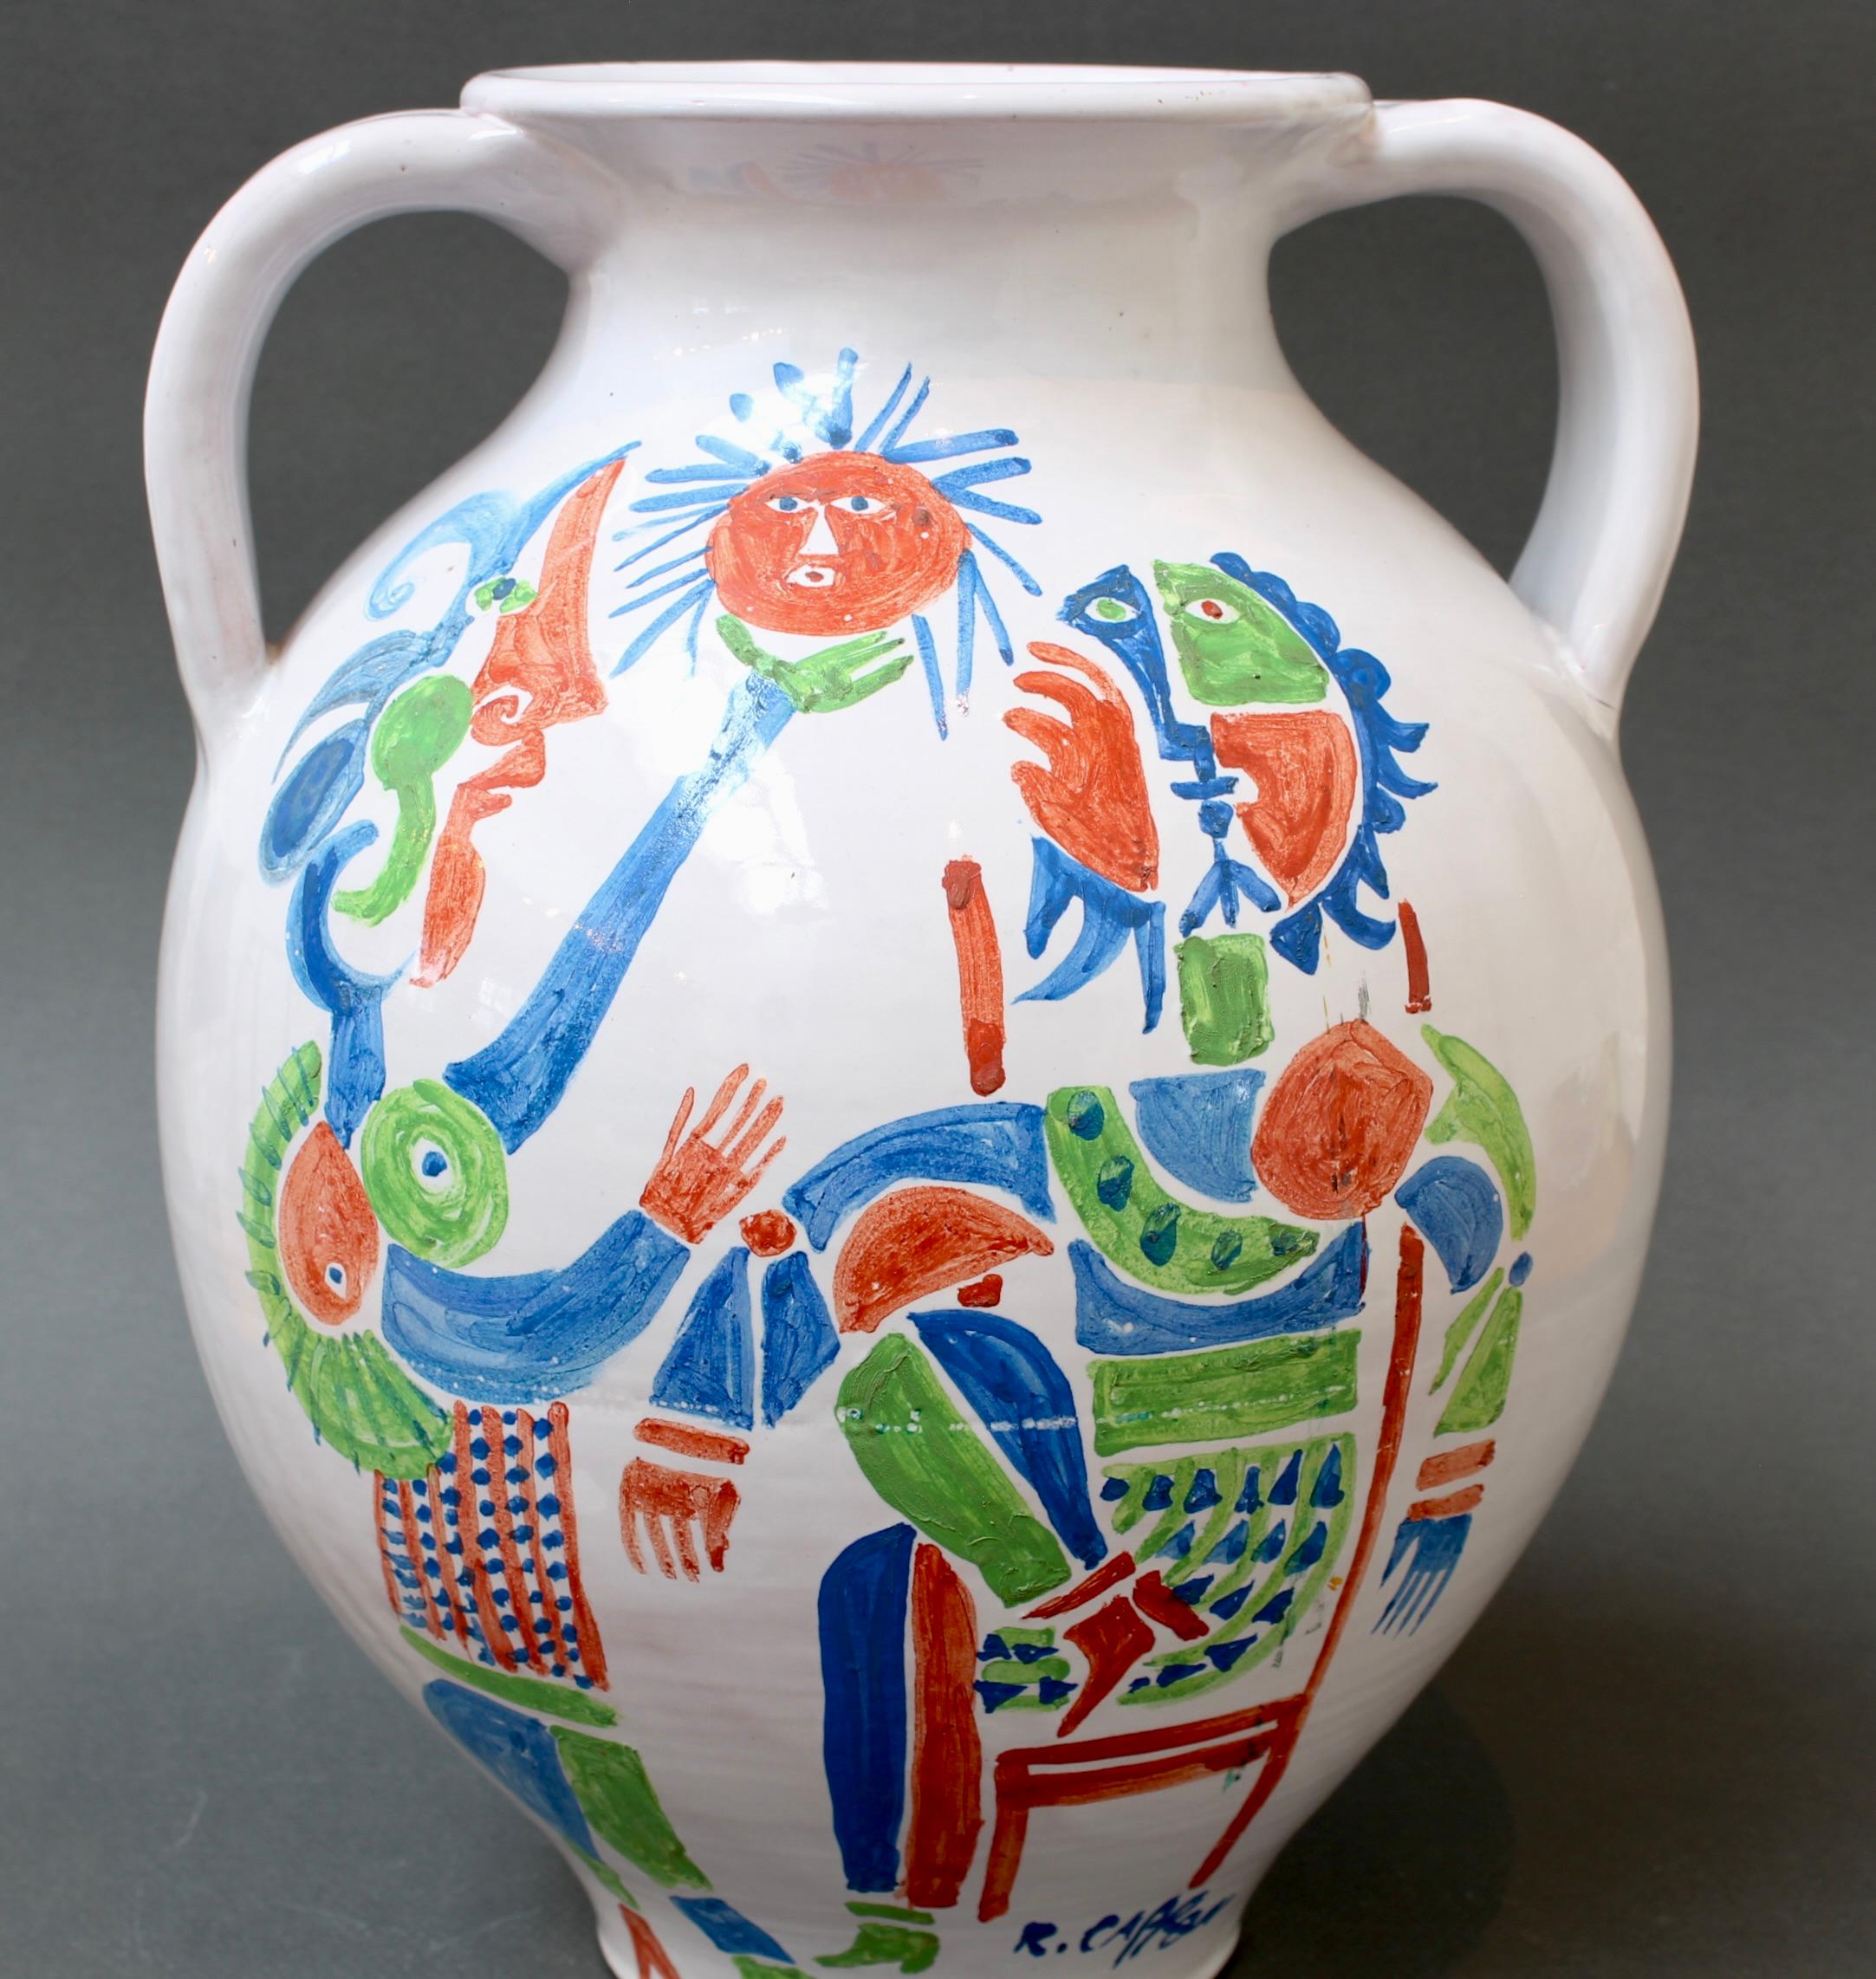 Vintage French Hand-Painted Ceramic Vase by Roger Capron (circa 1960s) For Sale 3